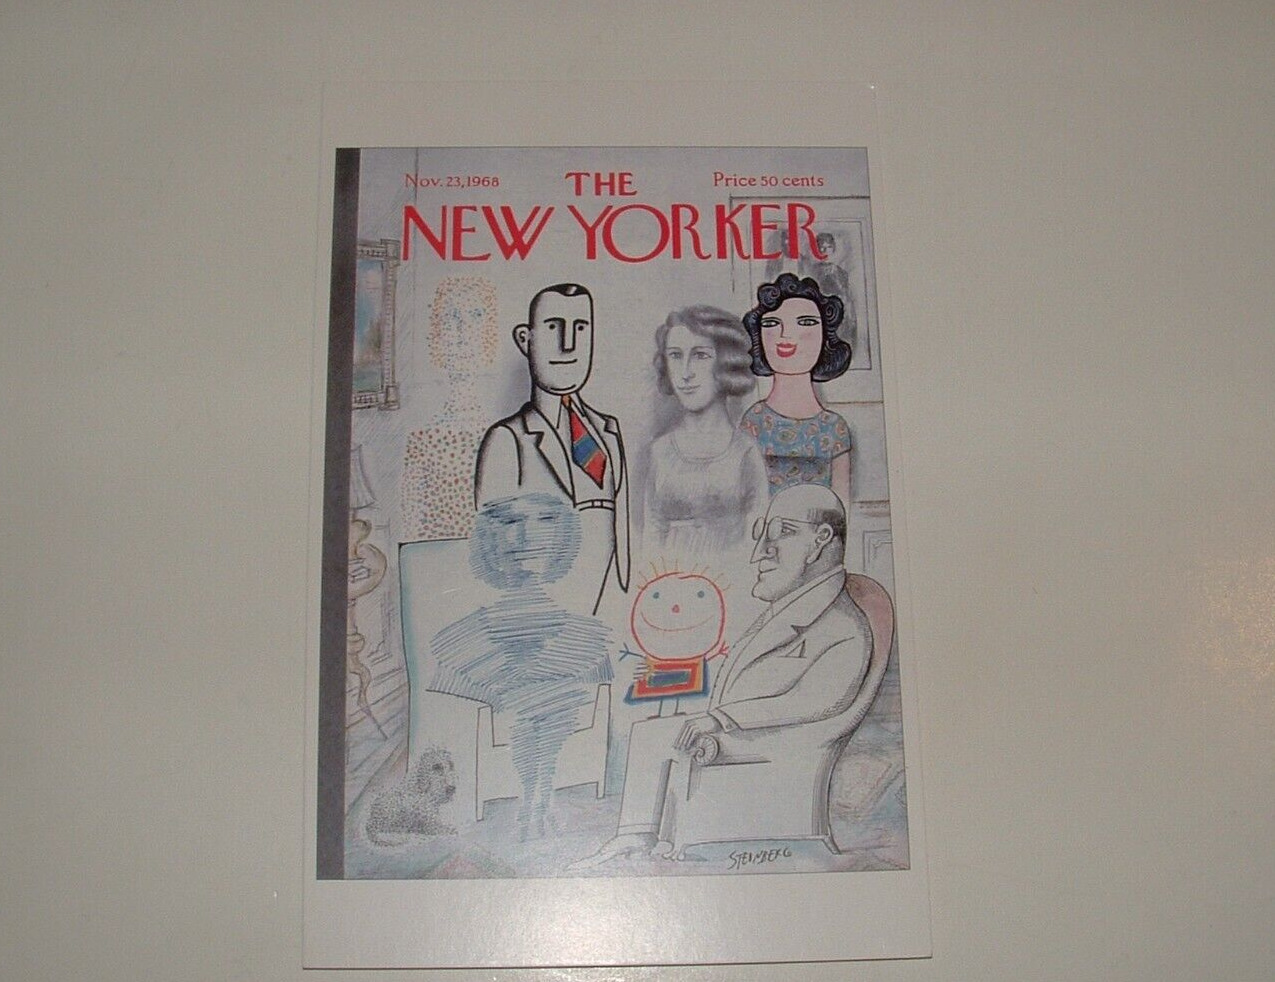 The New Yorker  Postcard, Cover By Saul Steinberg 1968, Unposted, pre-owned